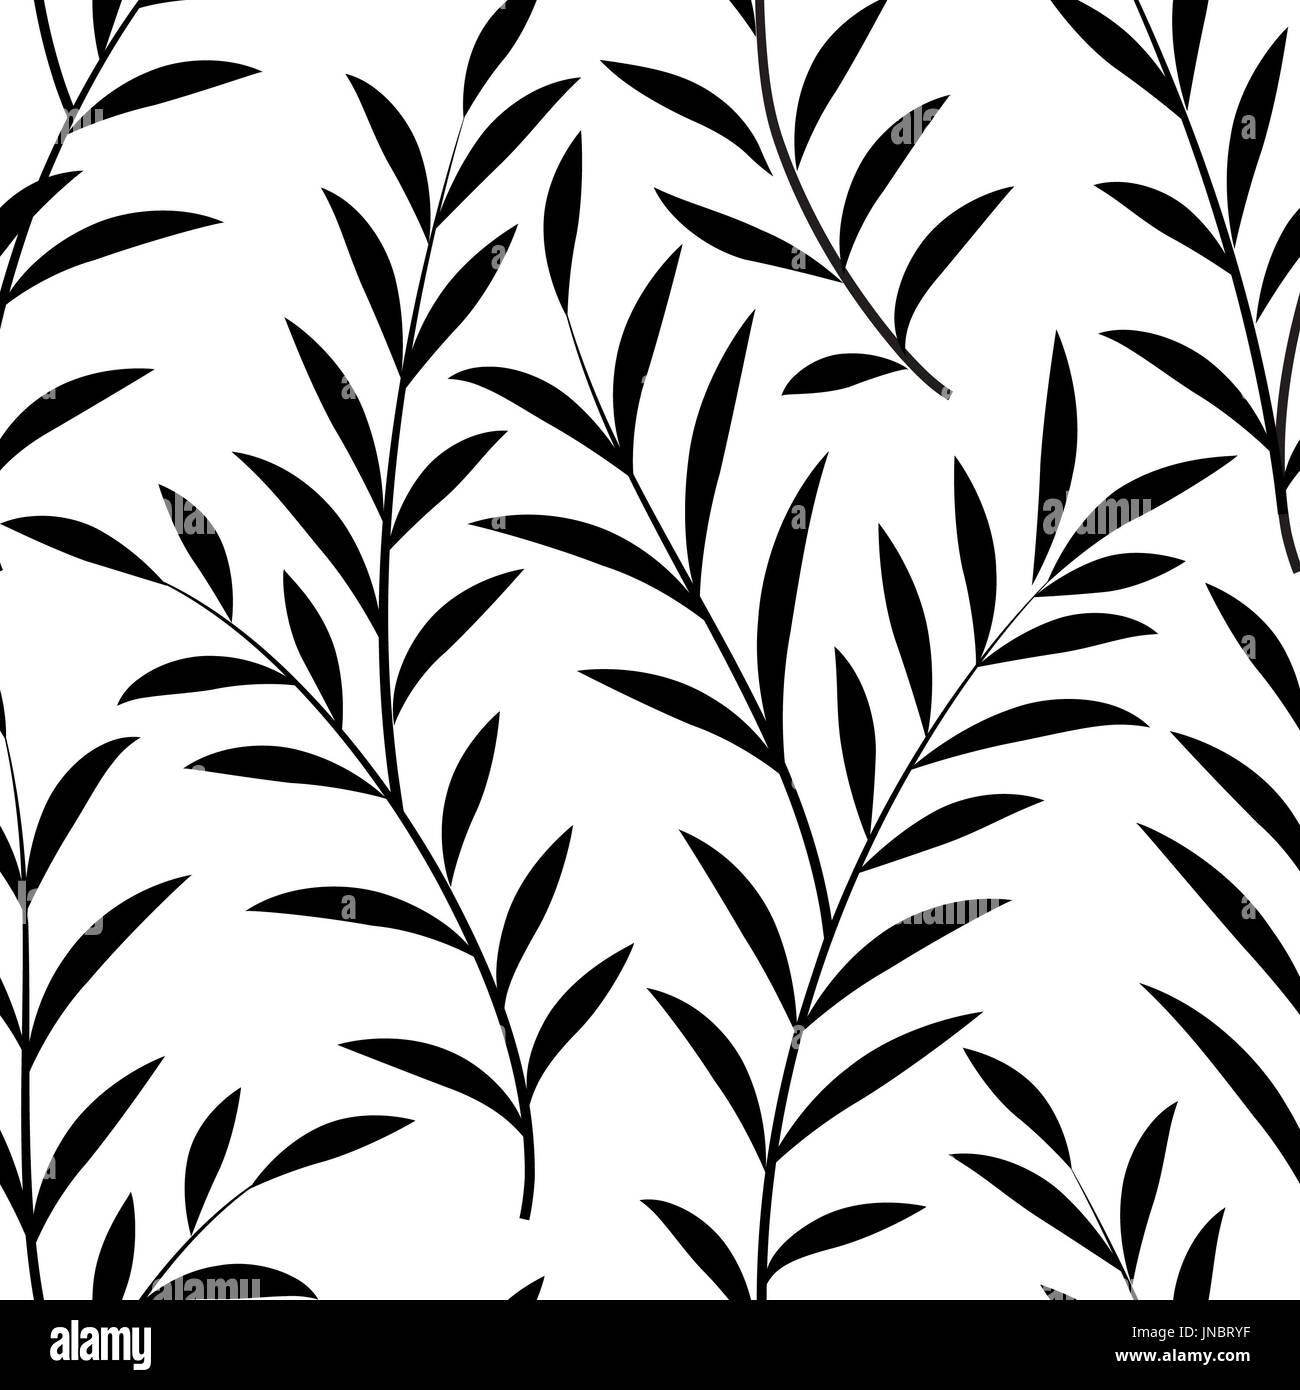 Abstract Floral Pattern Floral Leaves Silhouette Black And White Texture Stylish Abstract Vector Plant Ornamental Background Stock Photo Alamy